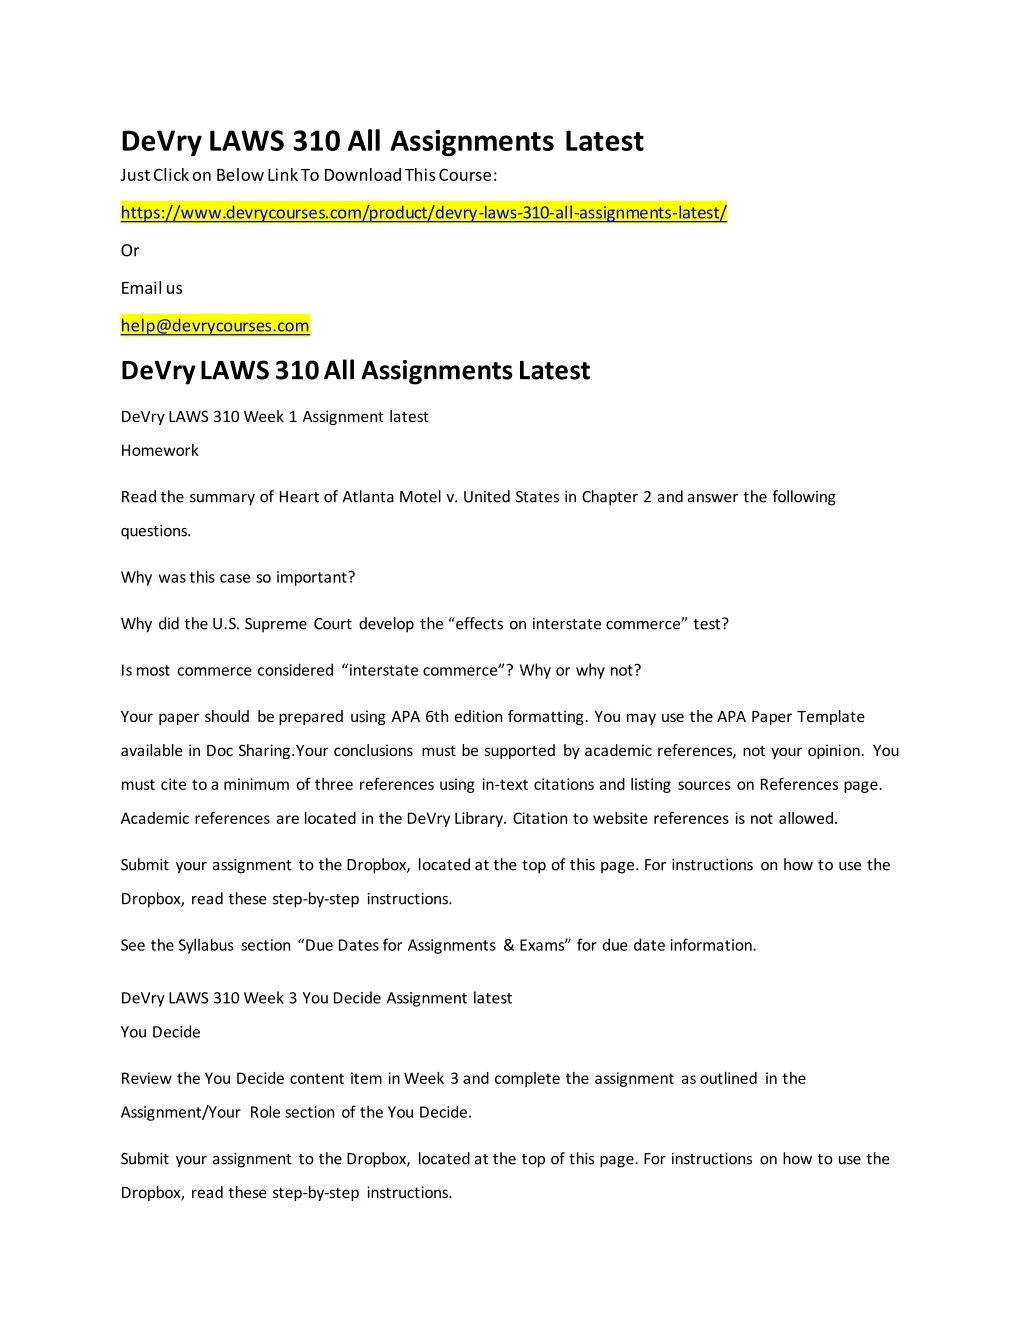 devry laws 310 all assignments latest just click